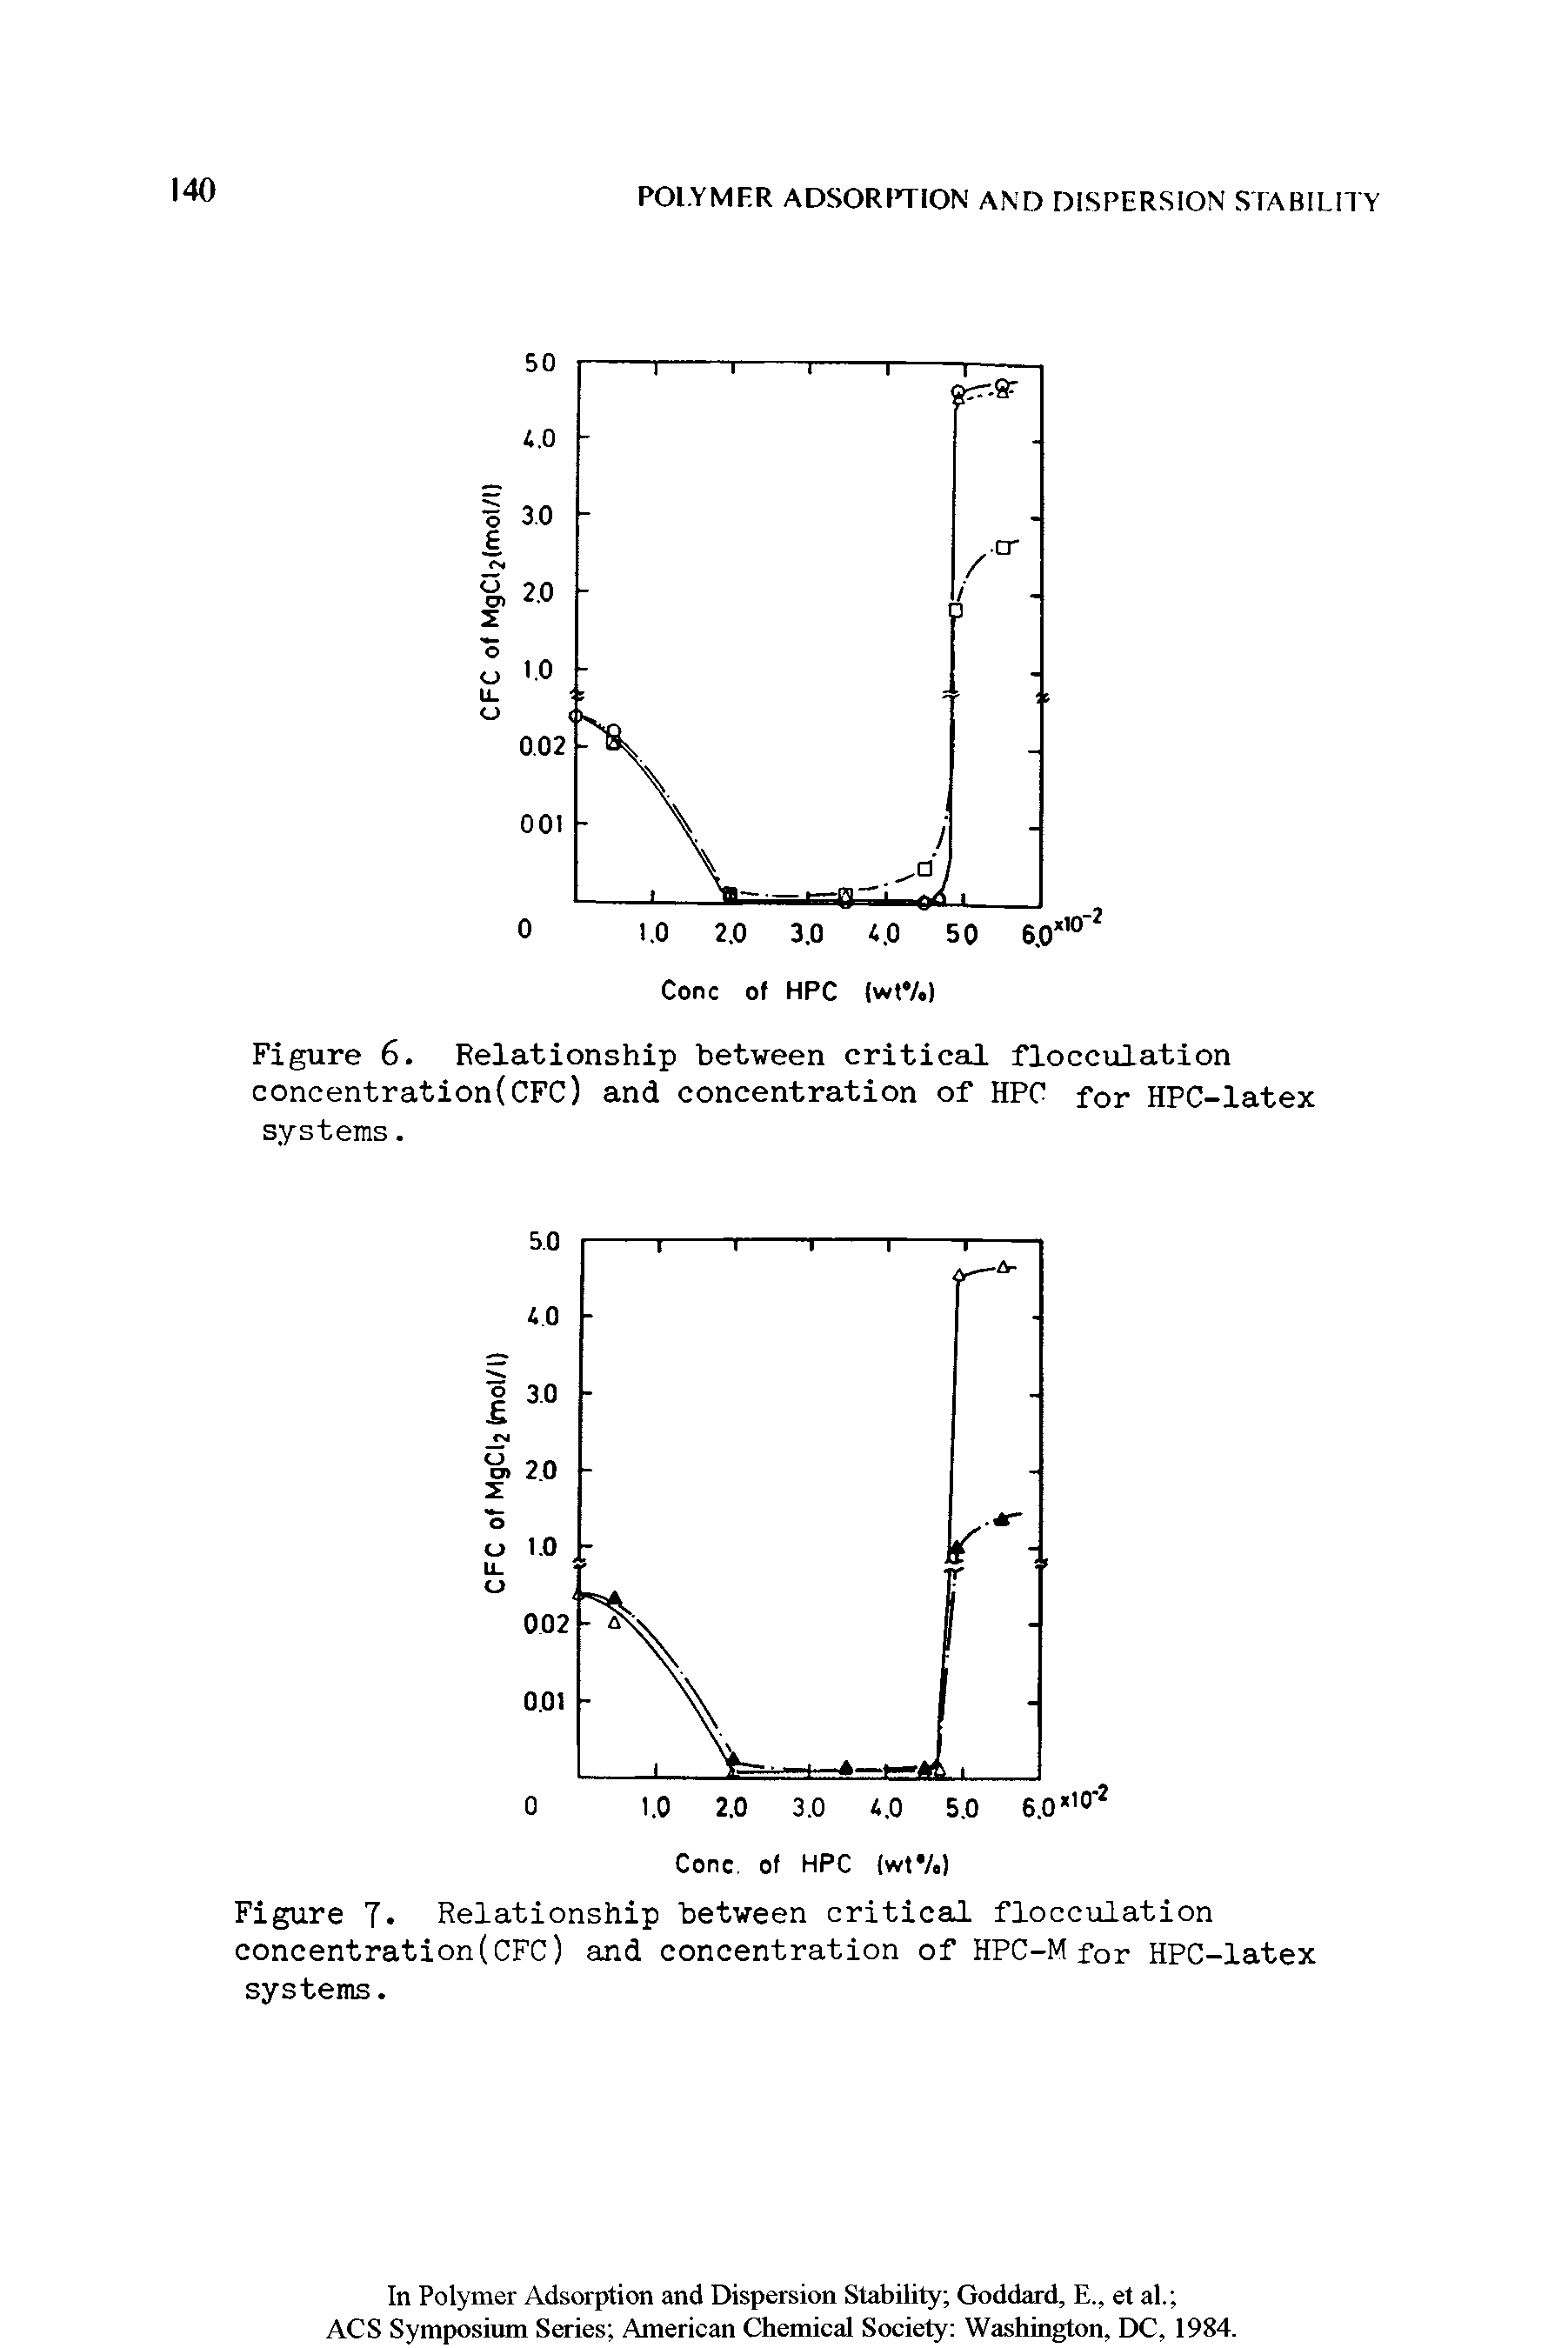 Figure 7 Relationship between critical flocculation concentration(CFC) and concentration of HPC-M for HPC-latex systems.